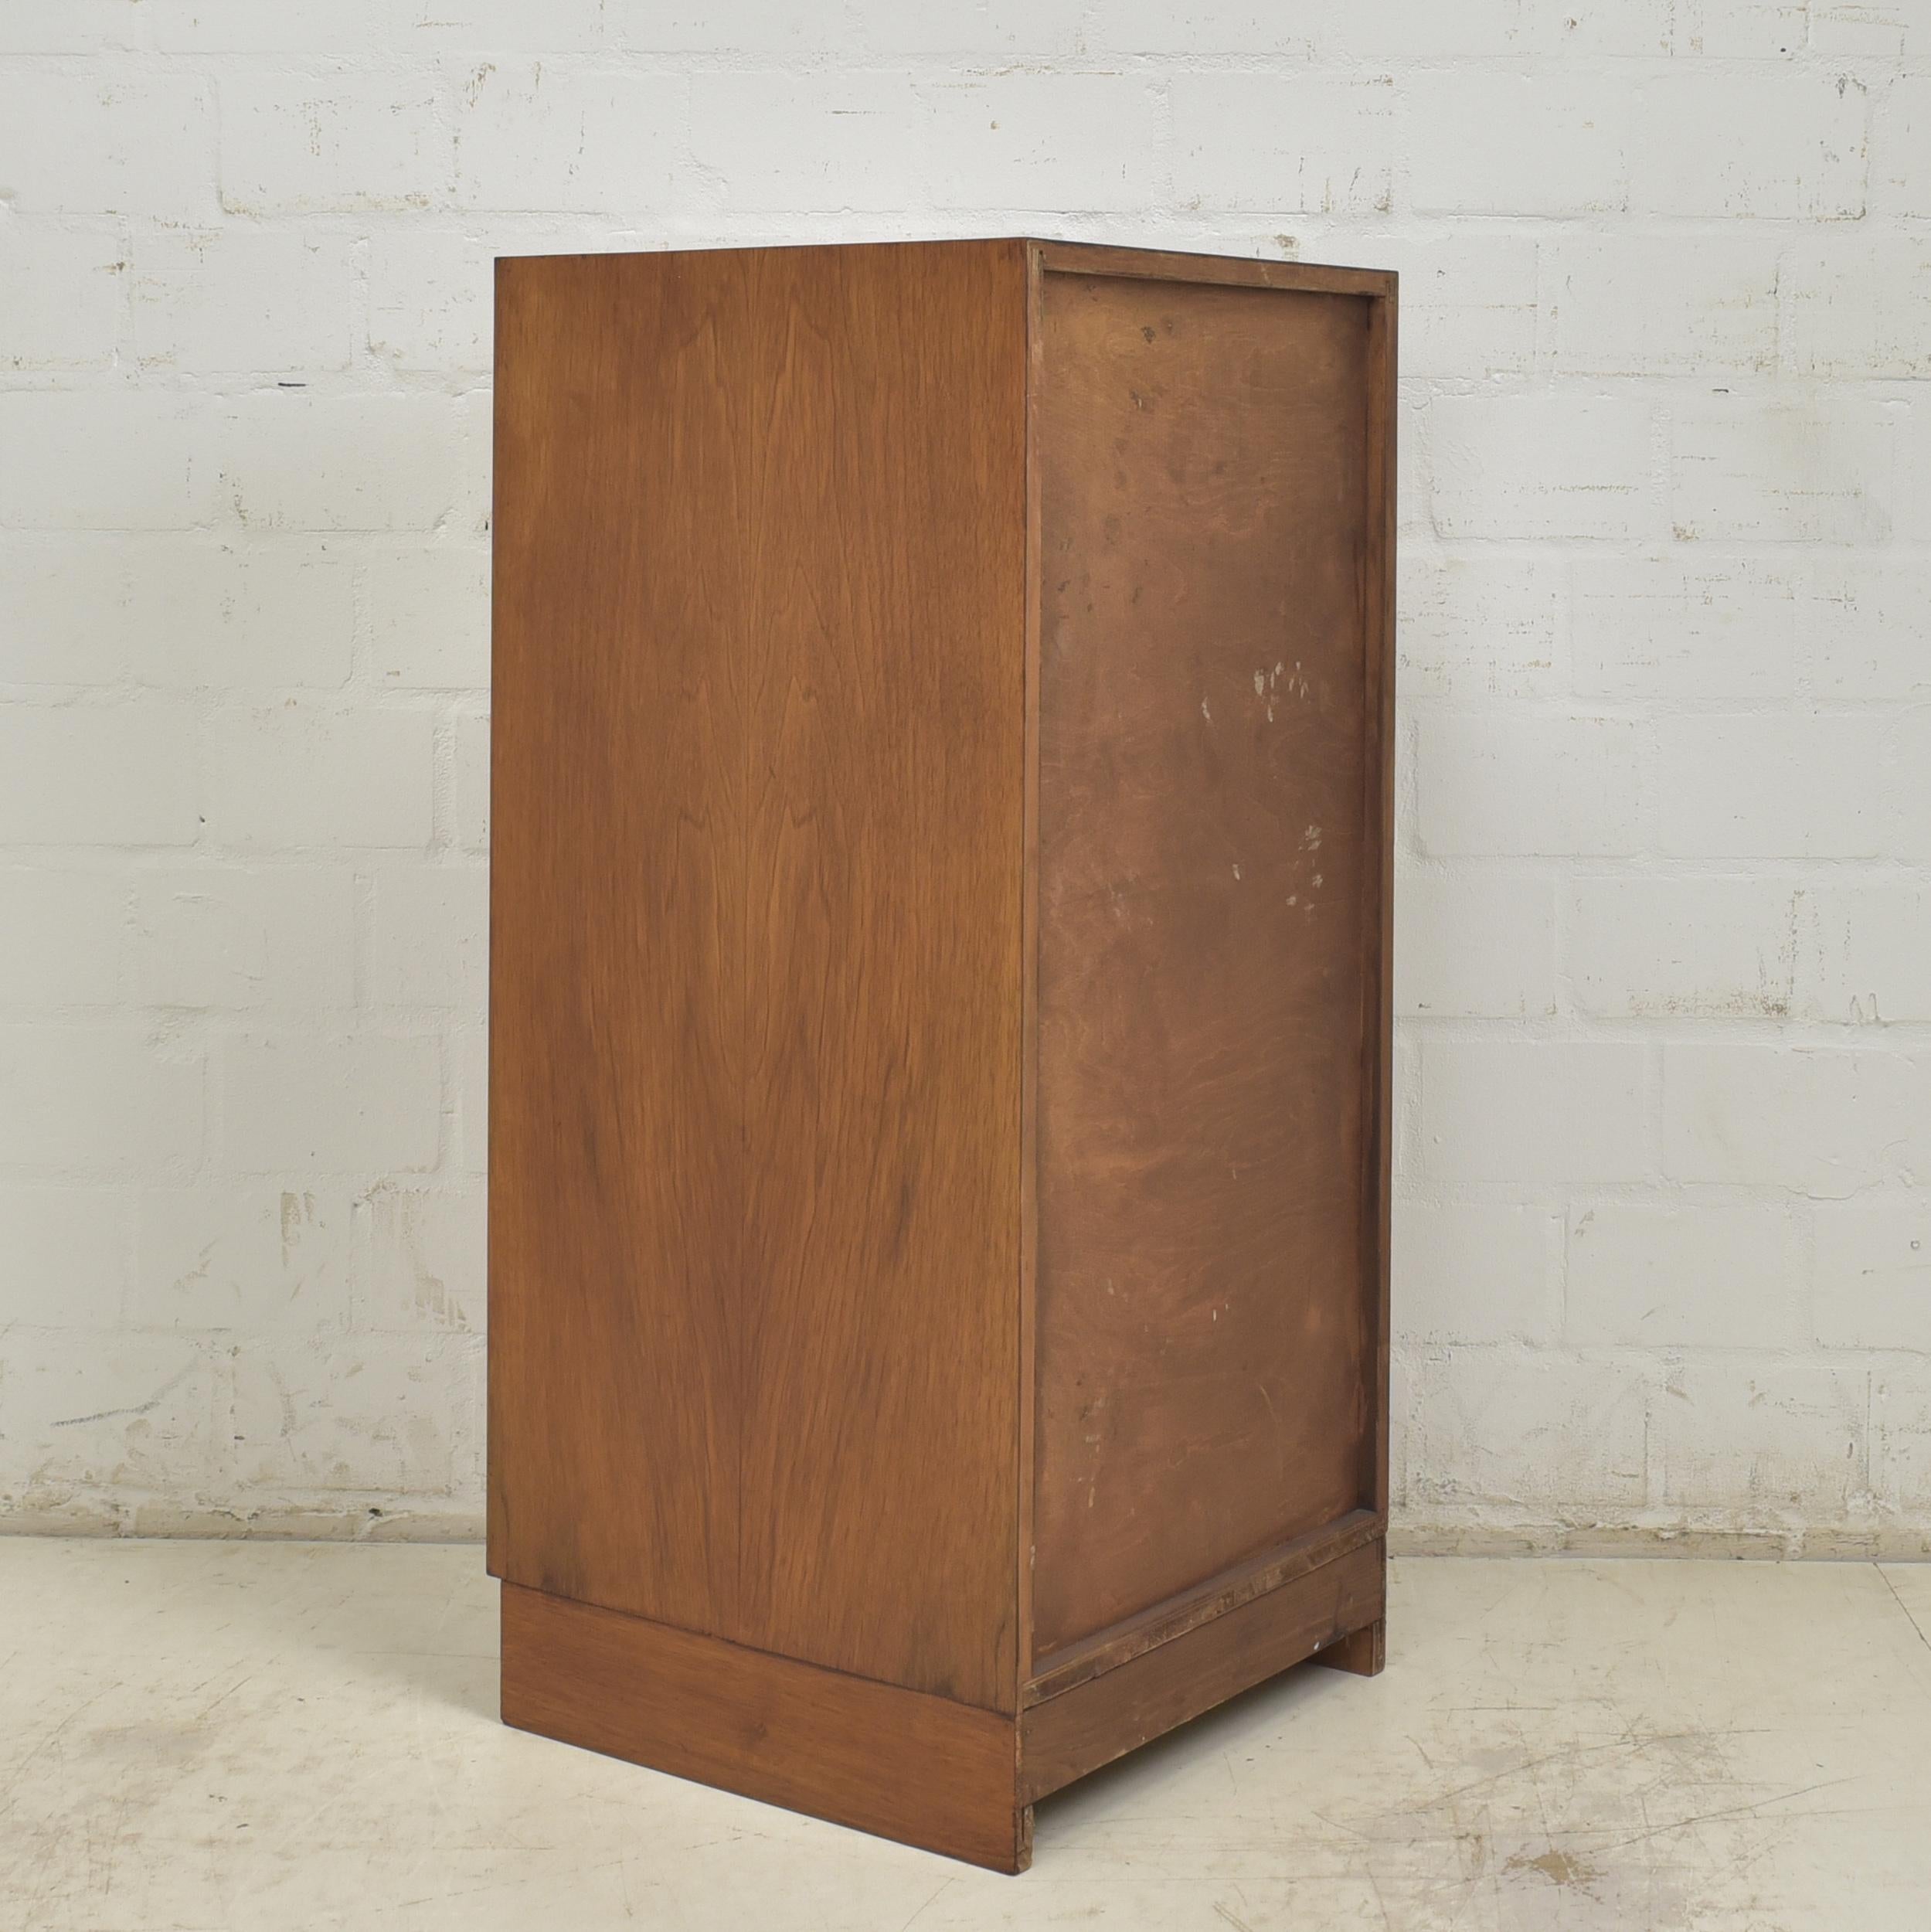 Retro Midcentury Art Deco Narrow Chest of Drawers / Small Cabinet, 1950 For Sale 7